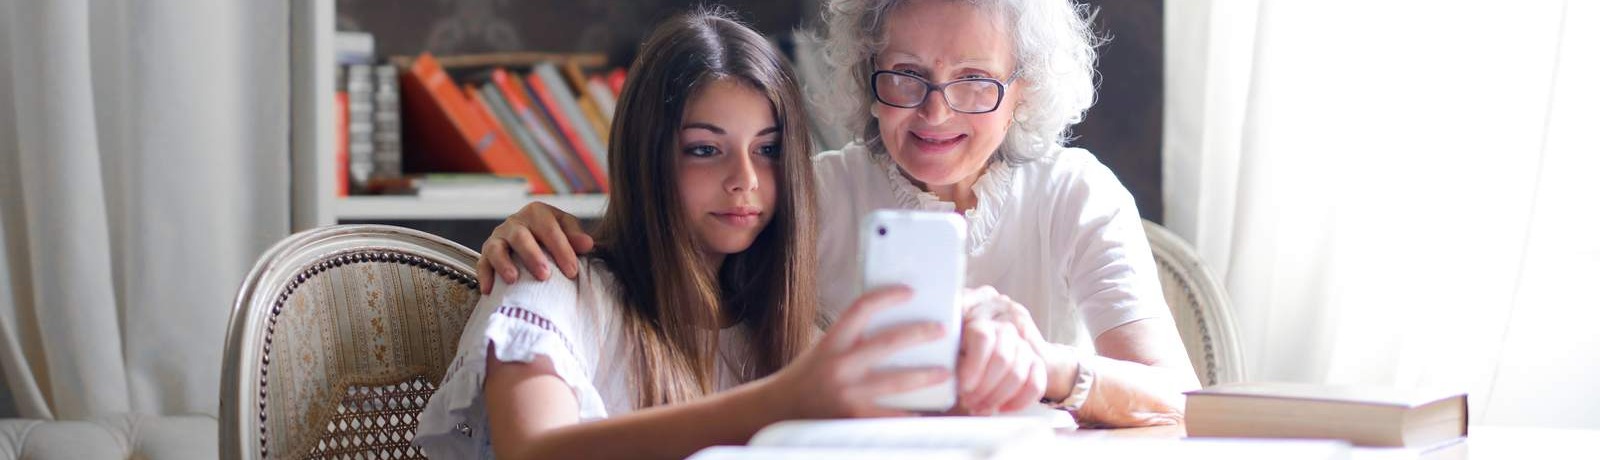 girl and elderly lady viewing mobile phone